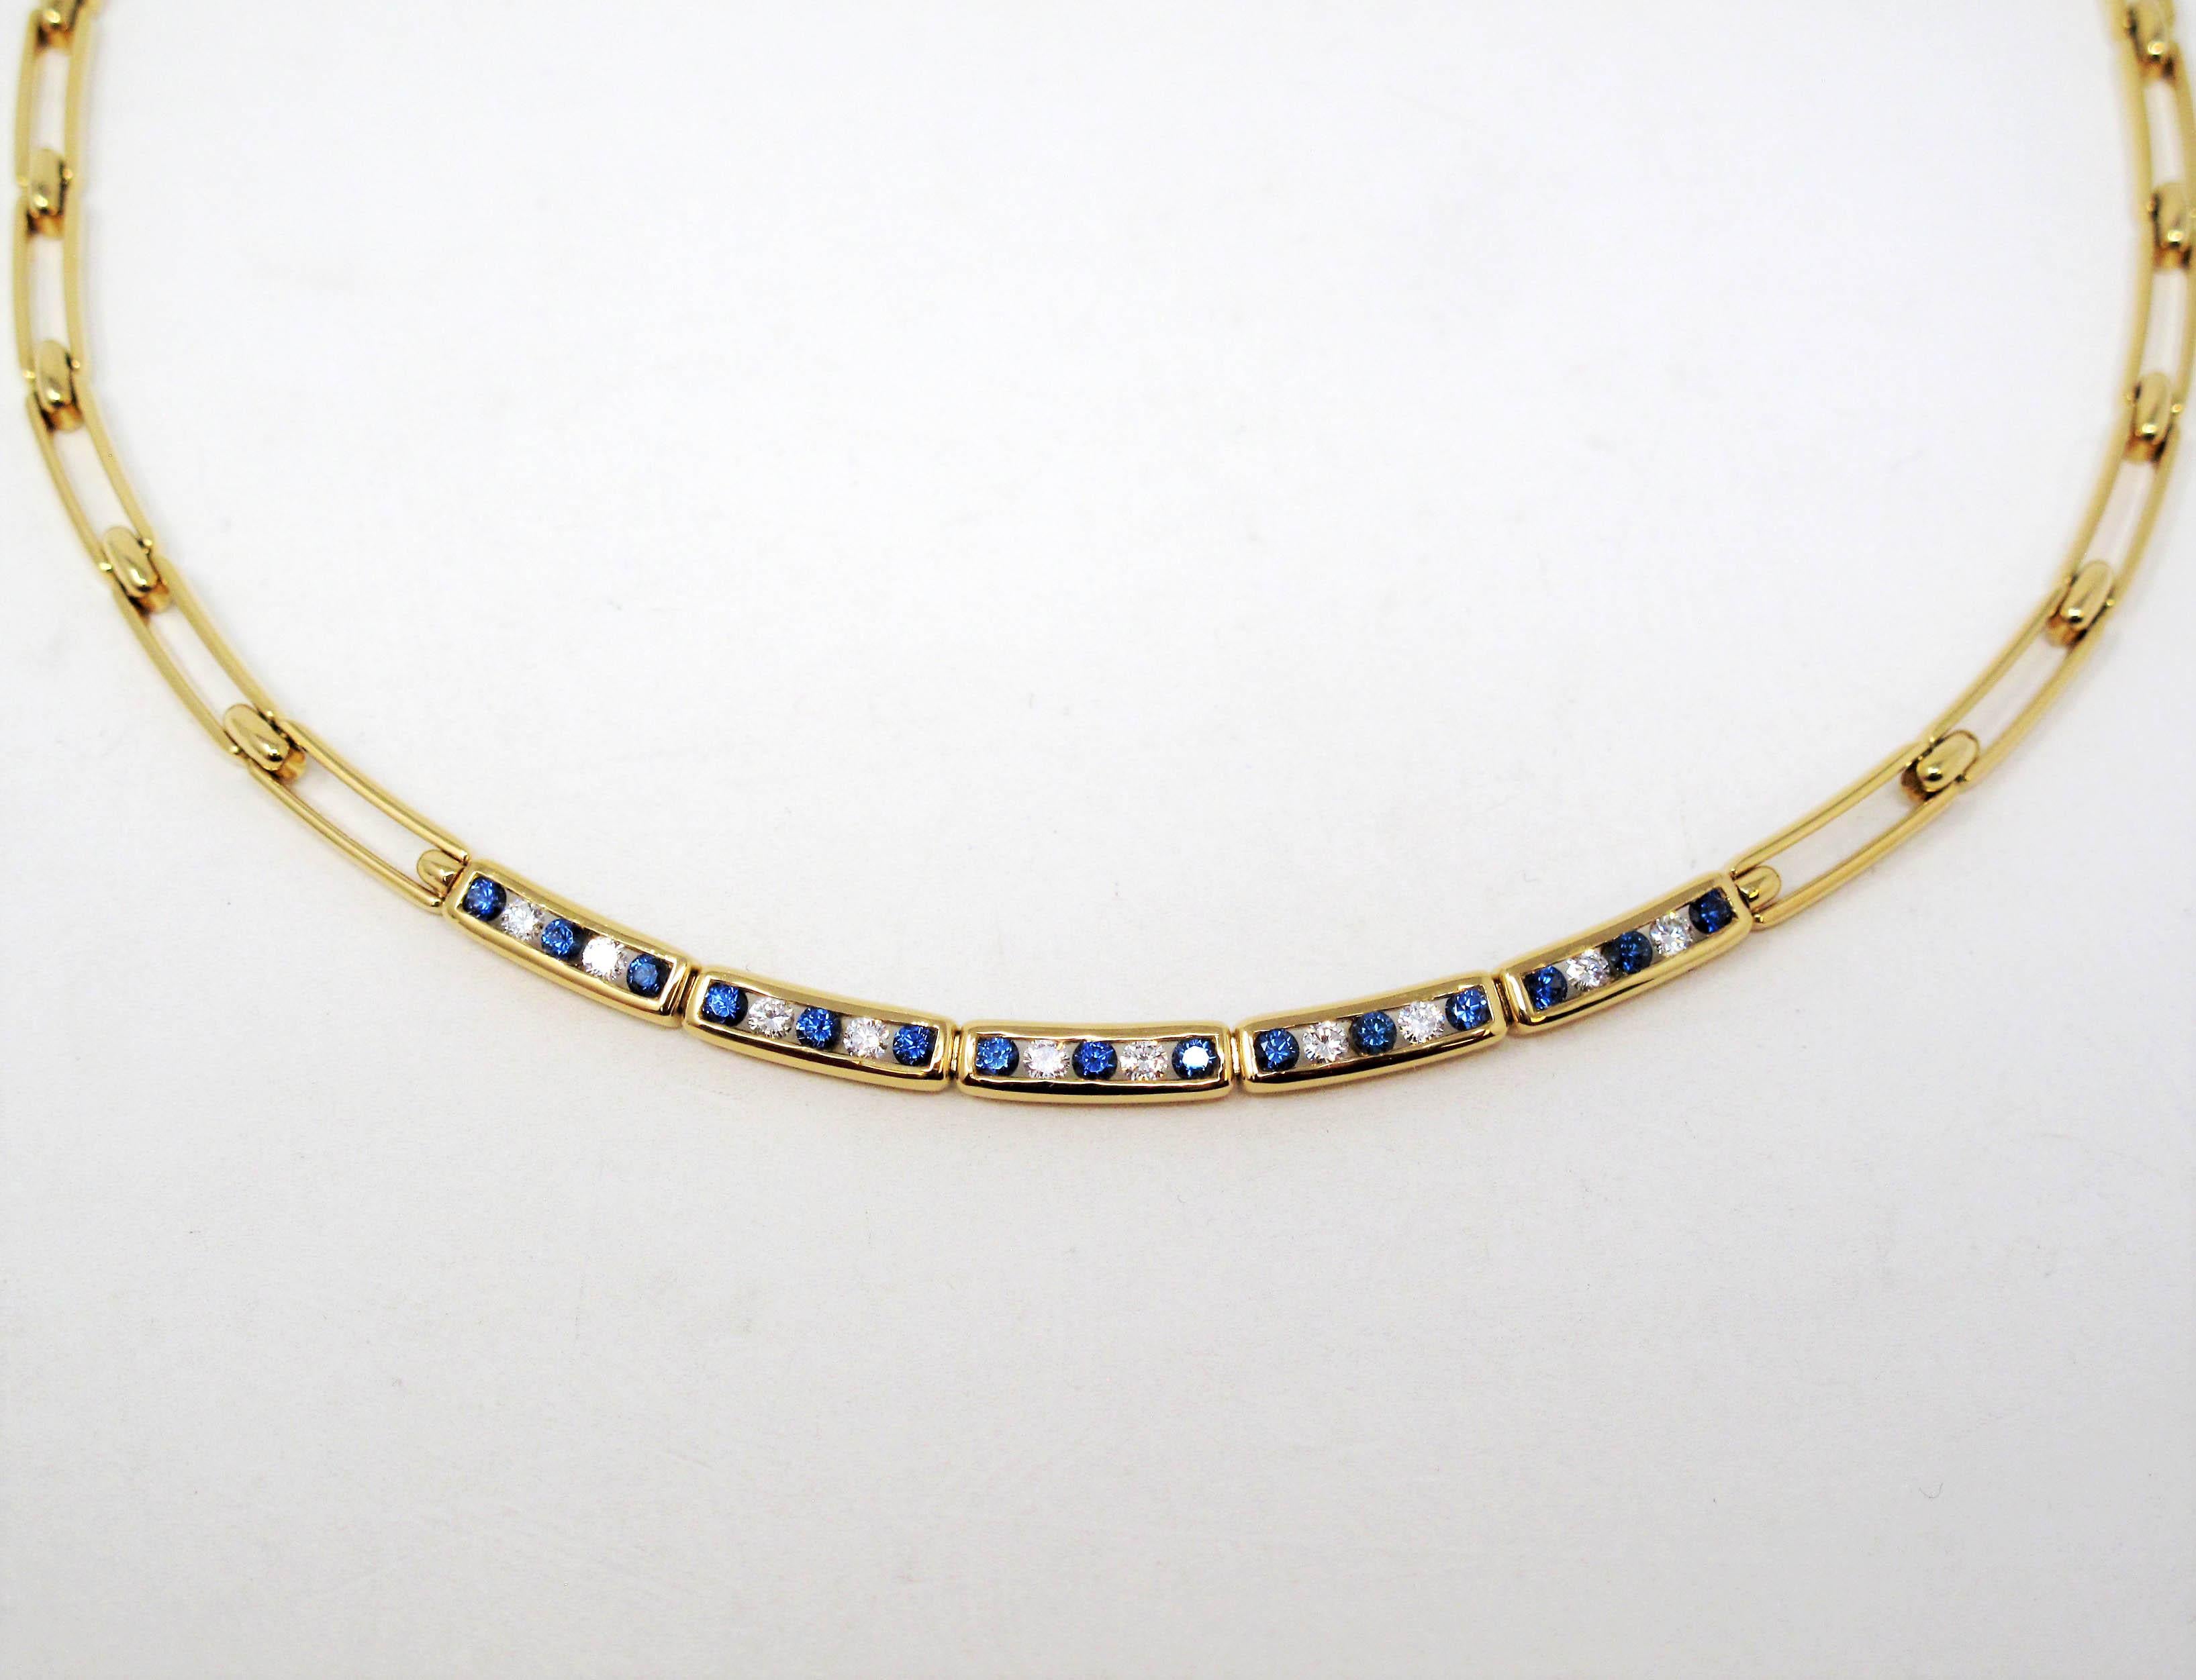 Tiffany & Co. wows us once again with this RARE, incredible sapphire and diamond choker necklace. Stunningly simple in design, the curved lines and glittering gemstones make the piece absolutely shine!

This beautiful designer necklace features a